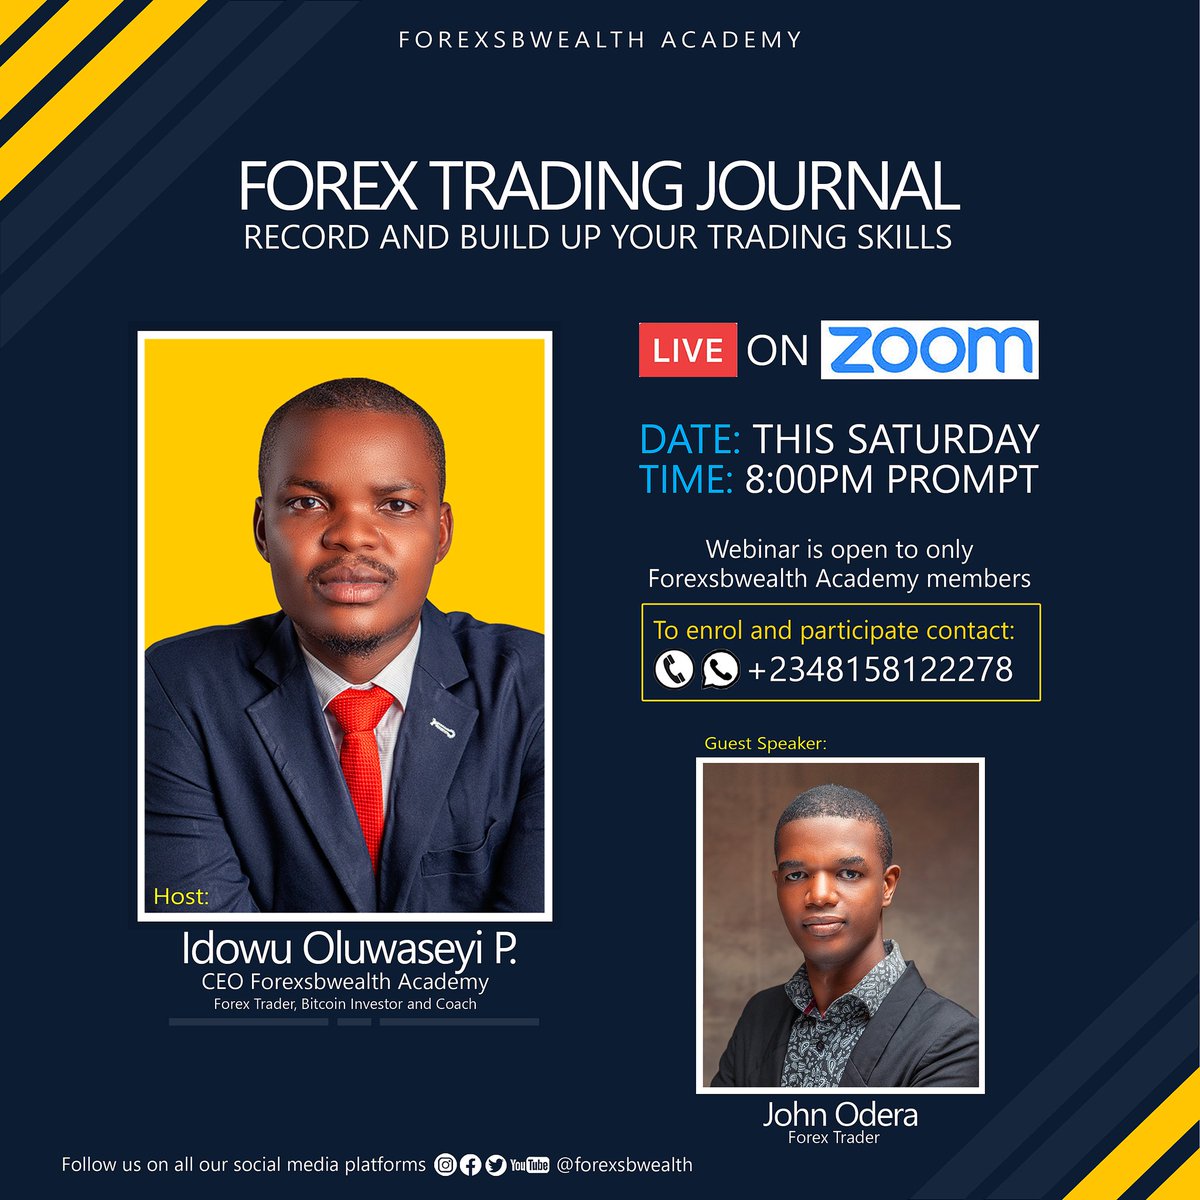 You don't want to miss this Saturday webinar
Learn how to set up your trading journal

#Forexsbwealth #forex #forexnigeria #tradeforex #learnforex #learnforextrading #learnforextradingonline #makemoney #makemoneyonline #concistency #profitableforextrader #successfulforextrader #